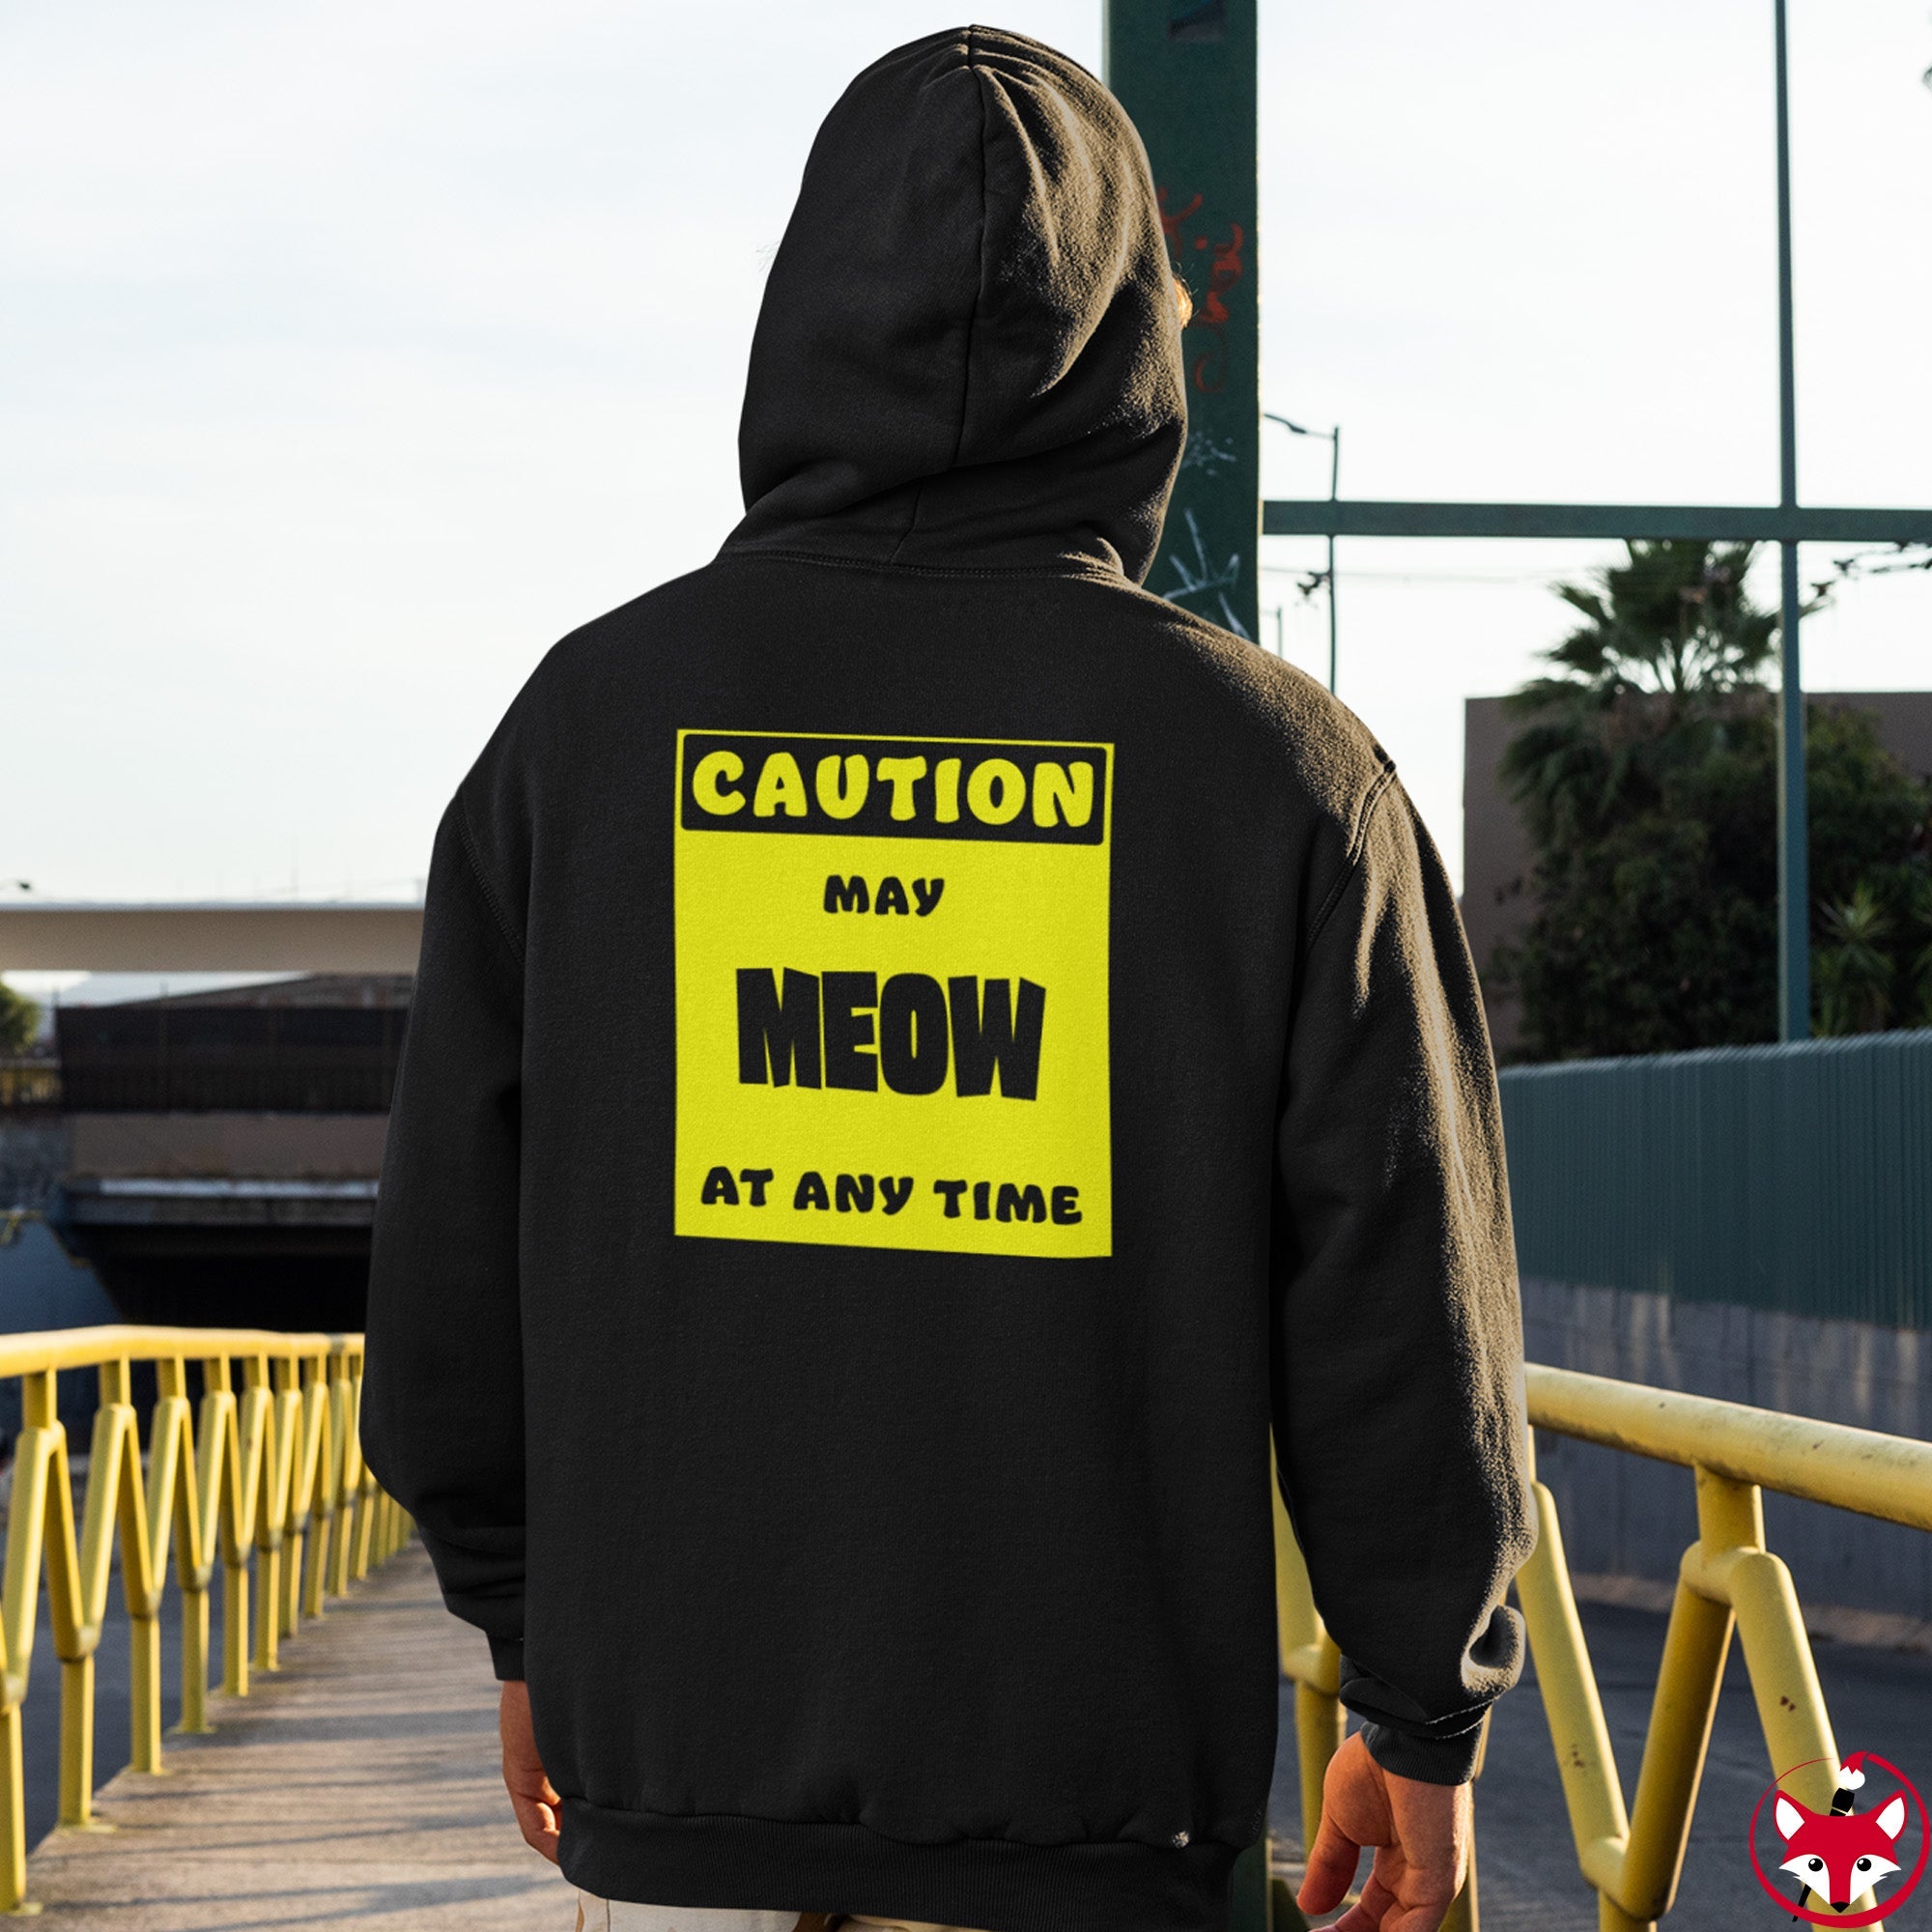 CAUTION! May MEOW at any time! - Hoodie Hoodie AFLT-Whootorca 